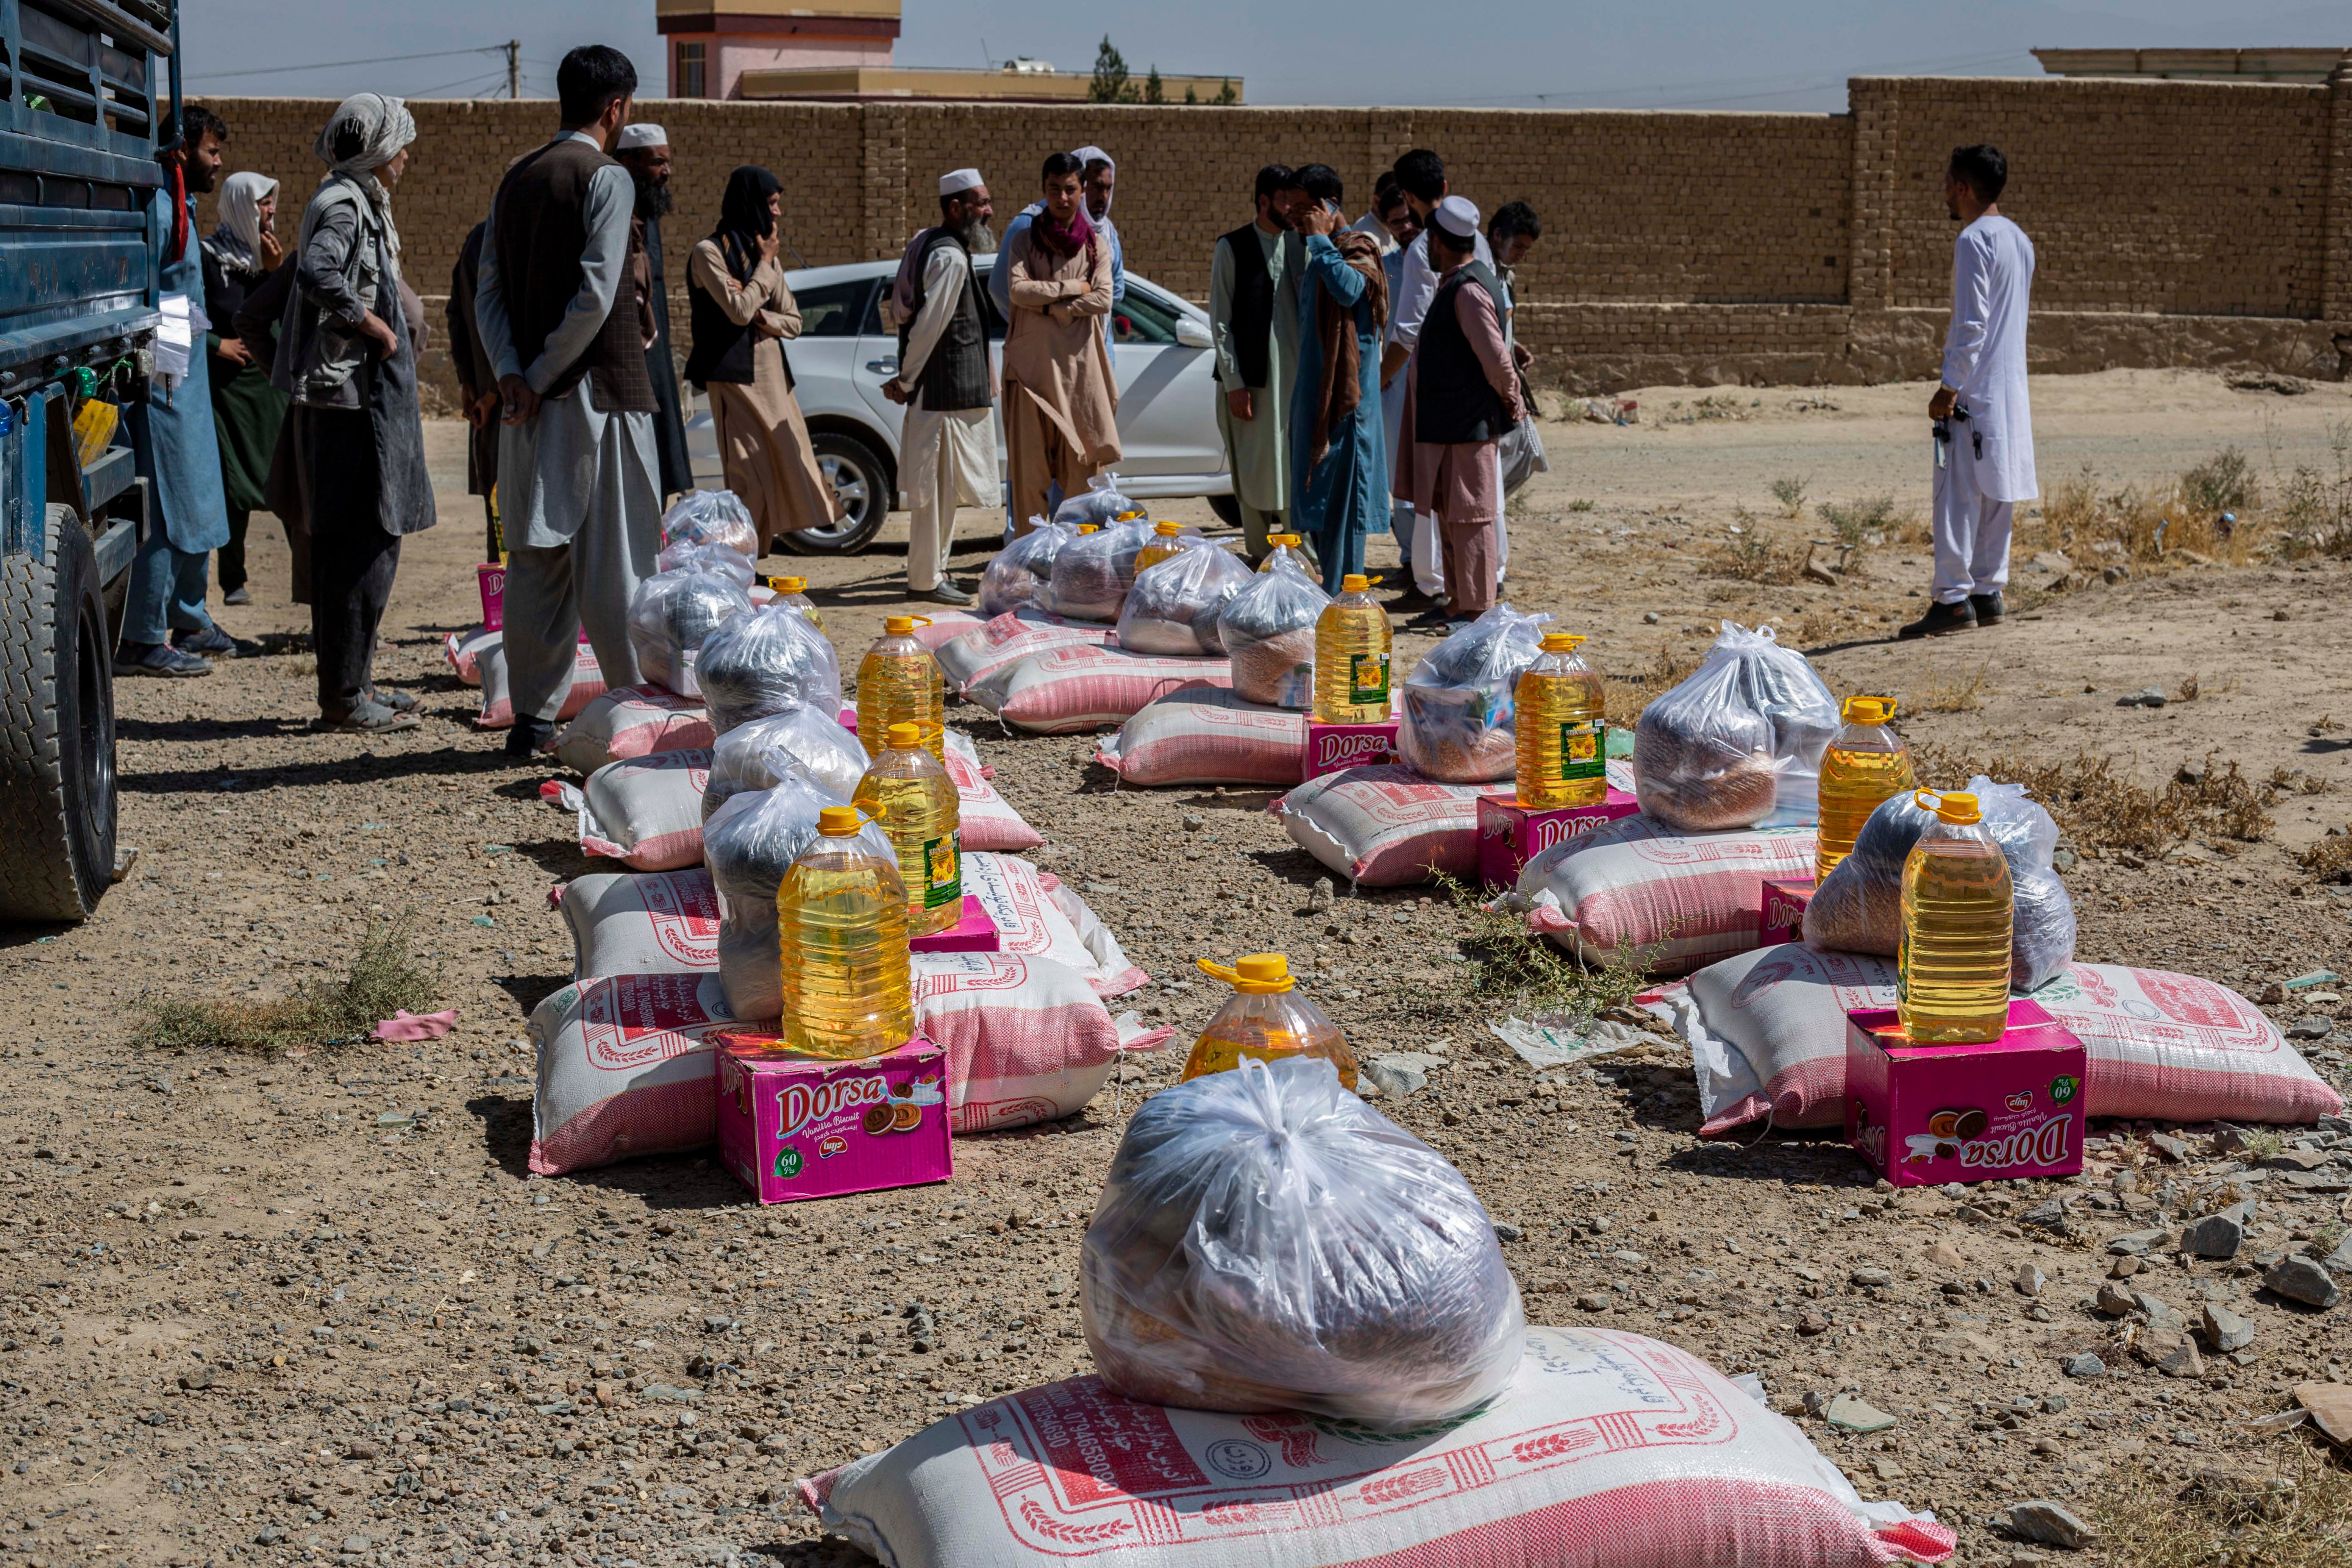 Aseel workers convene at Logar province, Afghanistan, for the distribution of food and medicines on Oct. 2, 2021 (Courtesy Aseel)